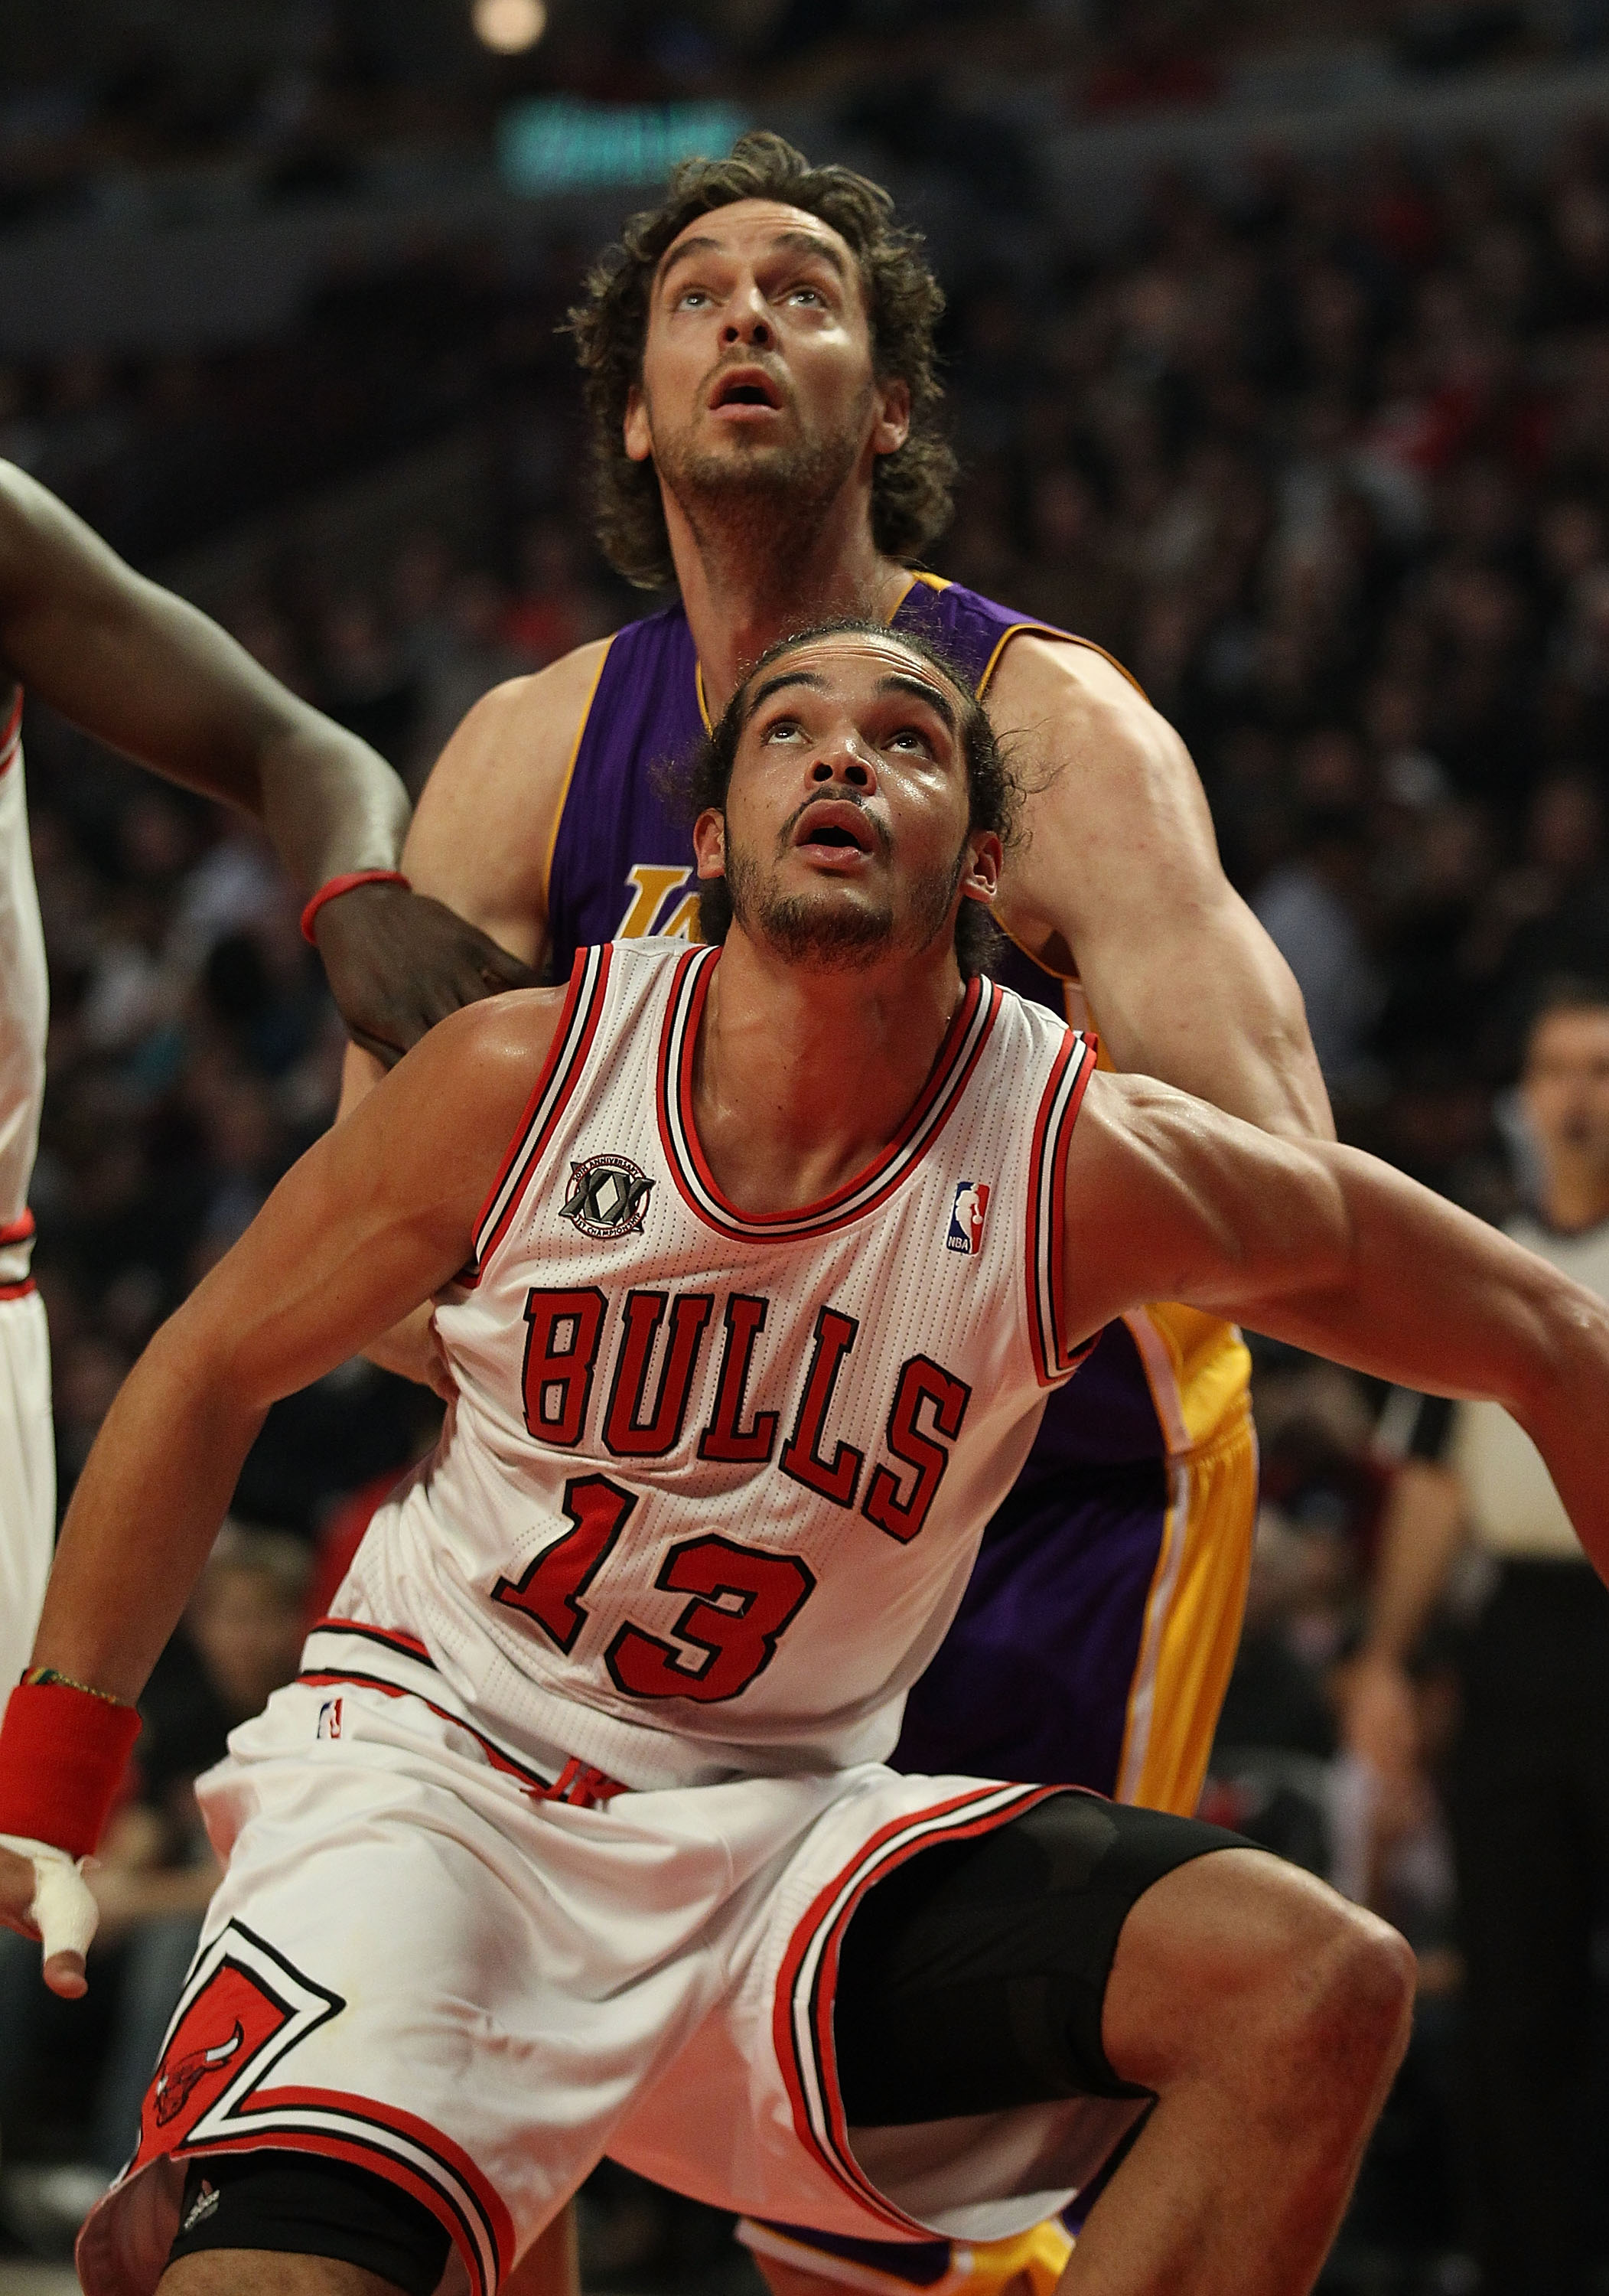 CHICAGO, IL - DECEMBER 10: Joakim Noah #13 of the Chicago Bulls boxes out Pau Gasol #16 of the Los Angeles Lakers at the United Center on December 10, 2010 in Chicago, Illinois. The Bulls defeated the Lakers 88-84. NOTE TO USER: User expressly acknowledge